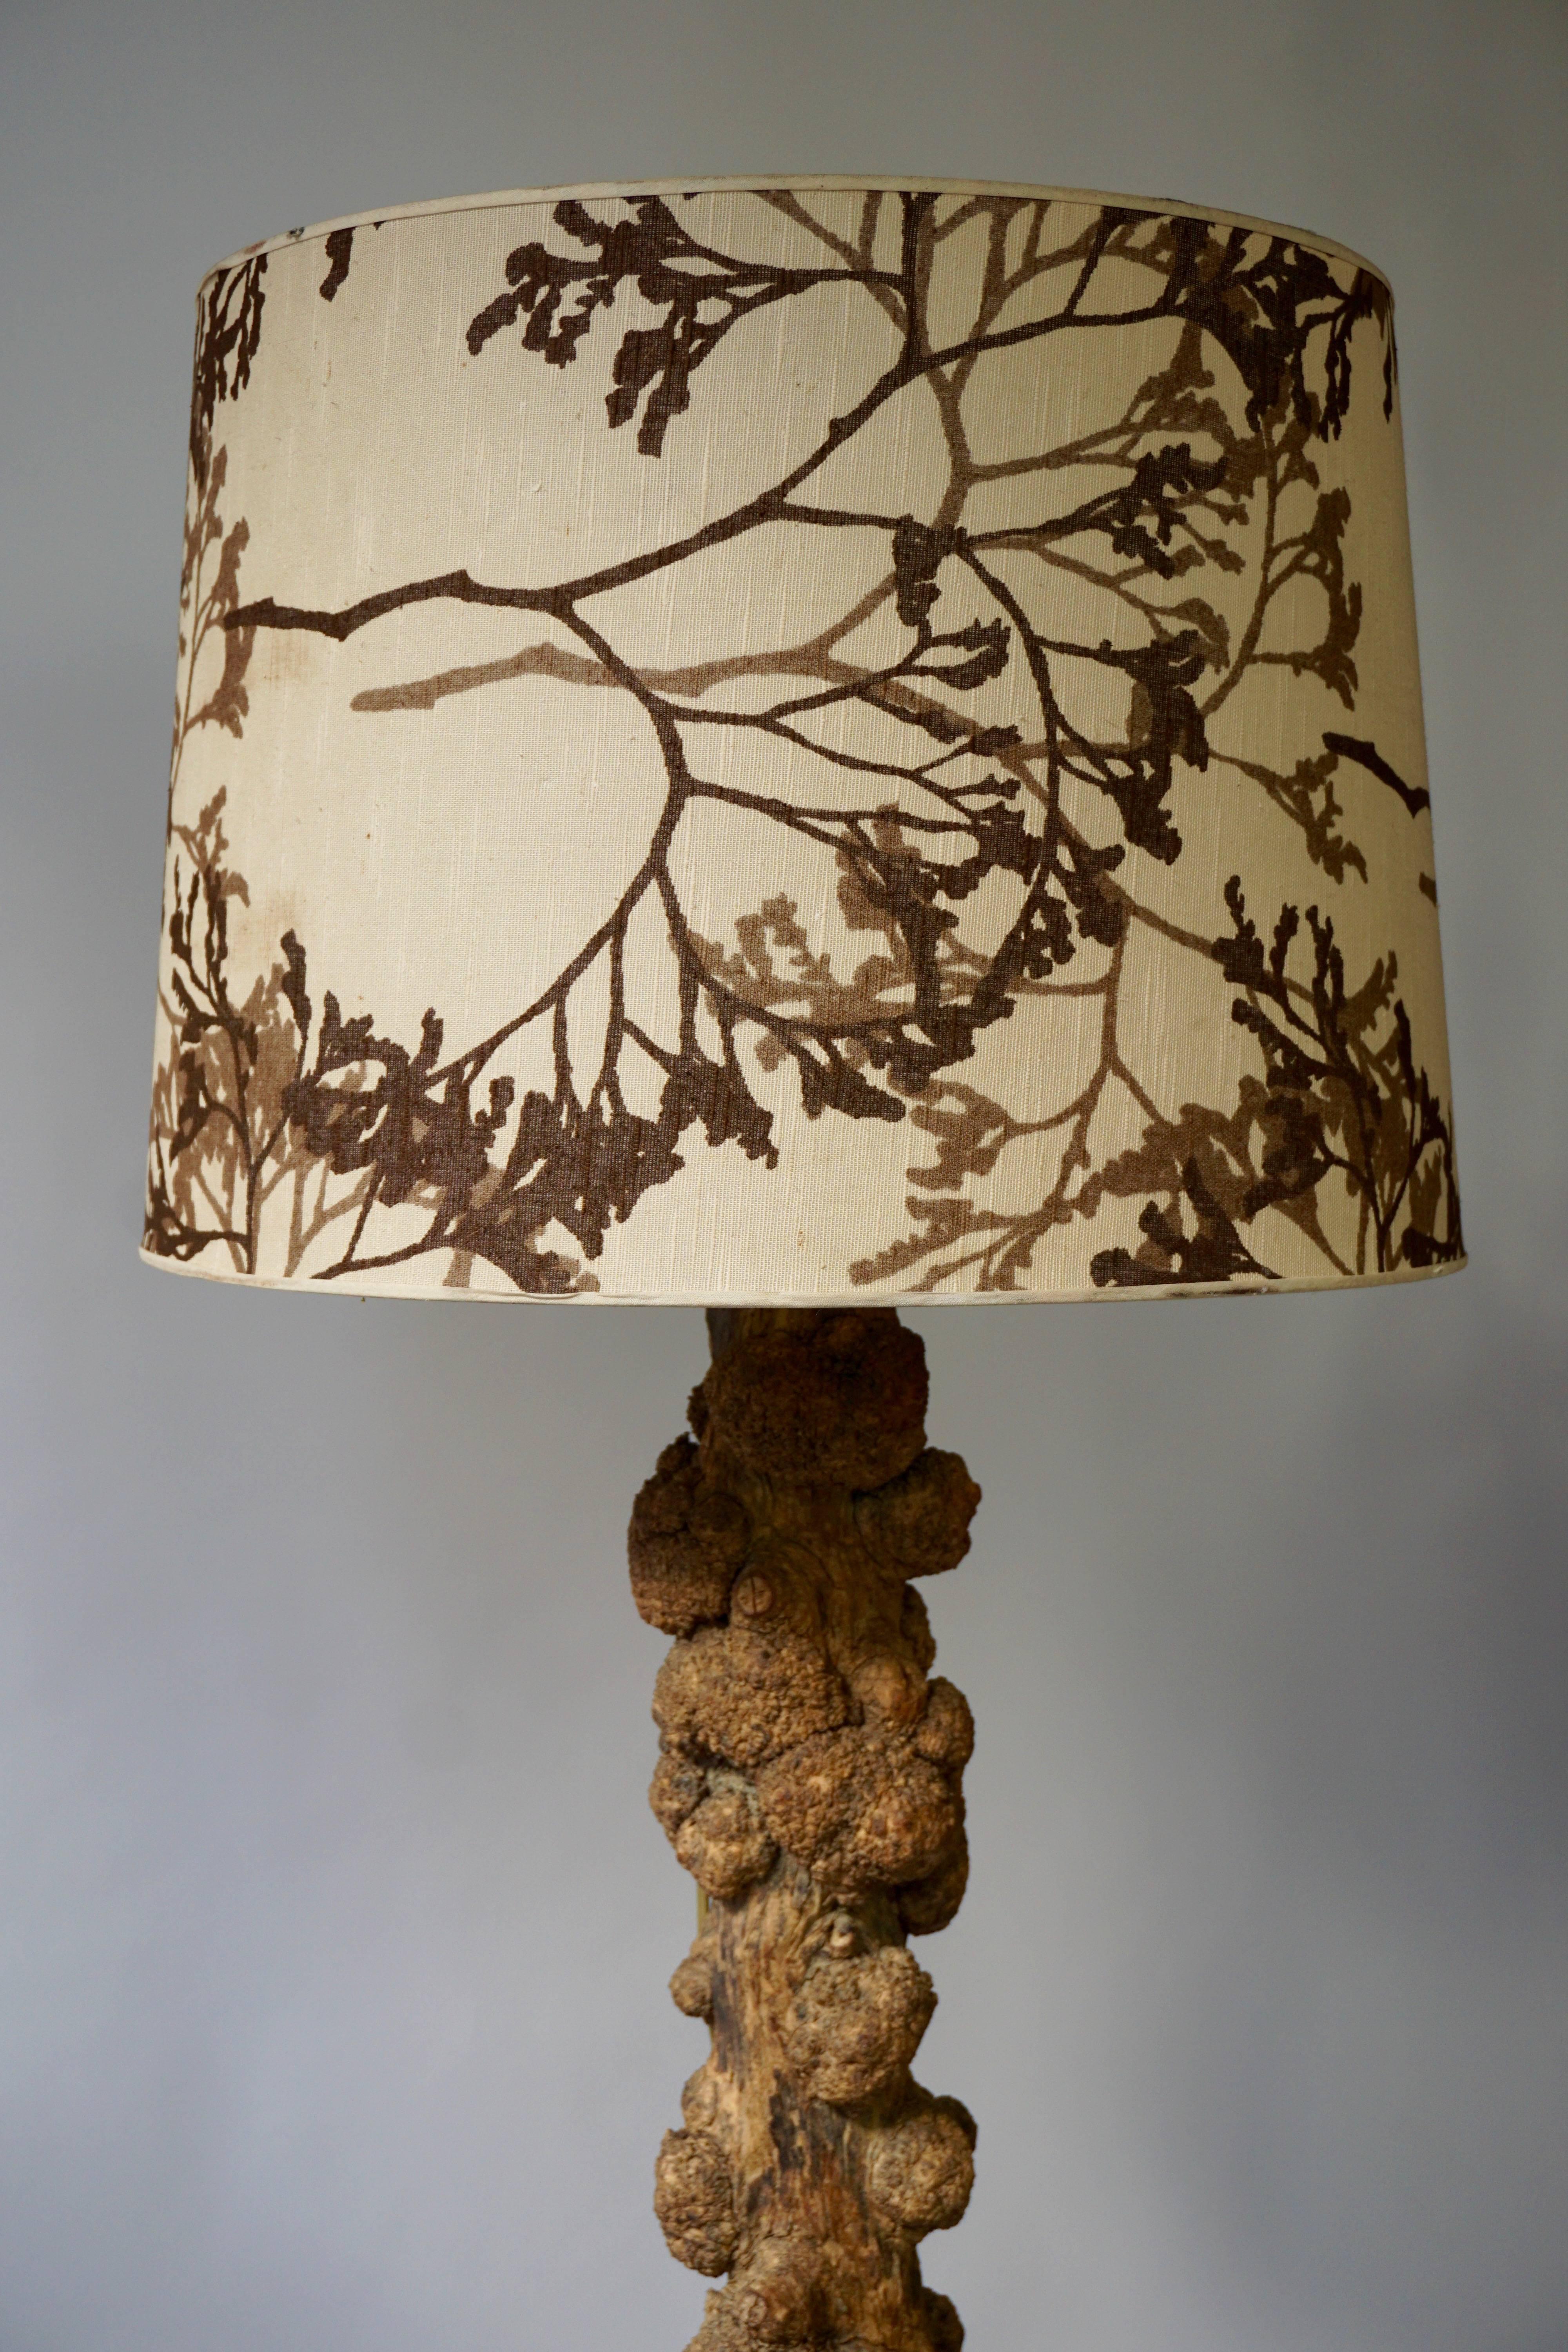 A unique and highly decorative Congolese hardwood tree trunk, displaying burly freak growths all-over and mounted as a standing lamp.
Beautiful original 1970s lampshade.
Height with shade: 180 cm.
Diameter shade: 50 cm. height shade 36